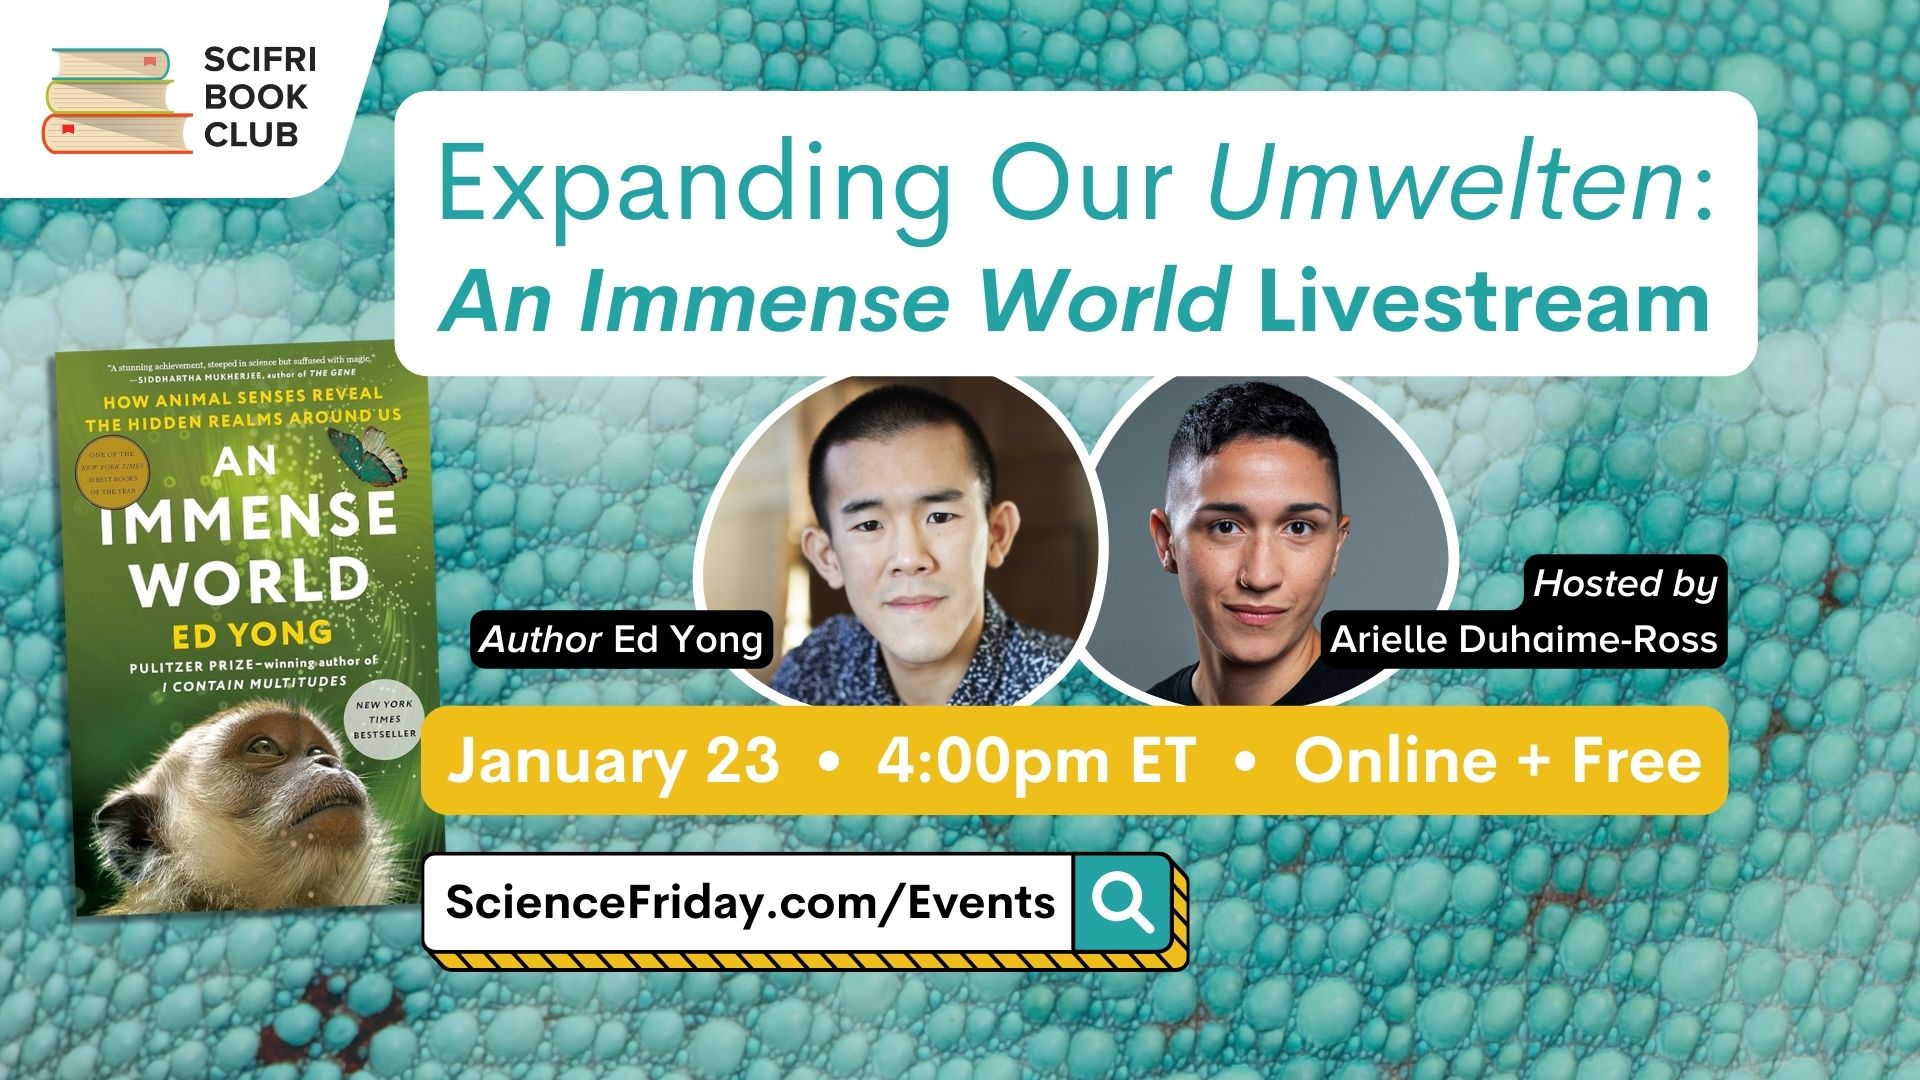 Event promotional image. In the top left corner, SciFri Book Club logo, with event info below, which reads: "Expanding Our Umwelten: An Immense World Livestream. January 23, 4:00pm ET, Online + Free, ScienceFriday.com/Events." To the left of the frame is the book cover of AN IMMENSE WORLD by Ed Yong. The middle features headshots of Author Ed Yong and host Arielle Duhaime-Ross. The background is a close-up photo of aquamarine lizard skin.